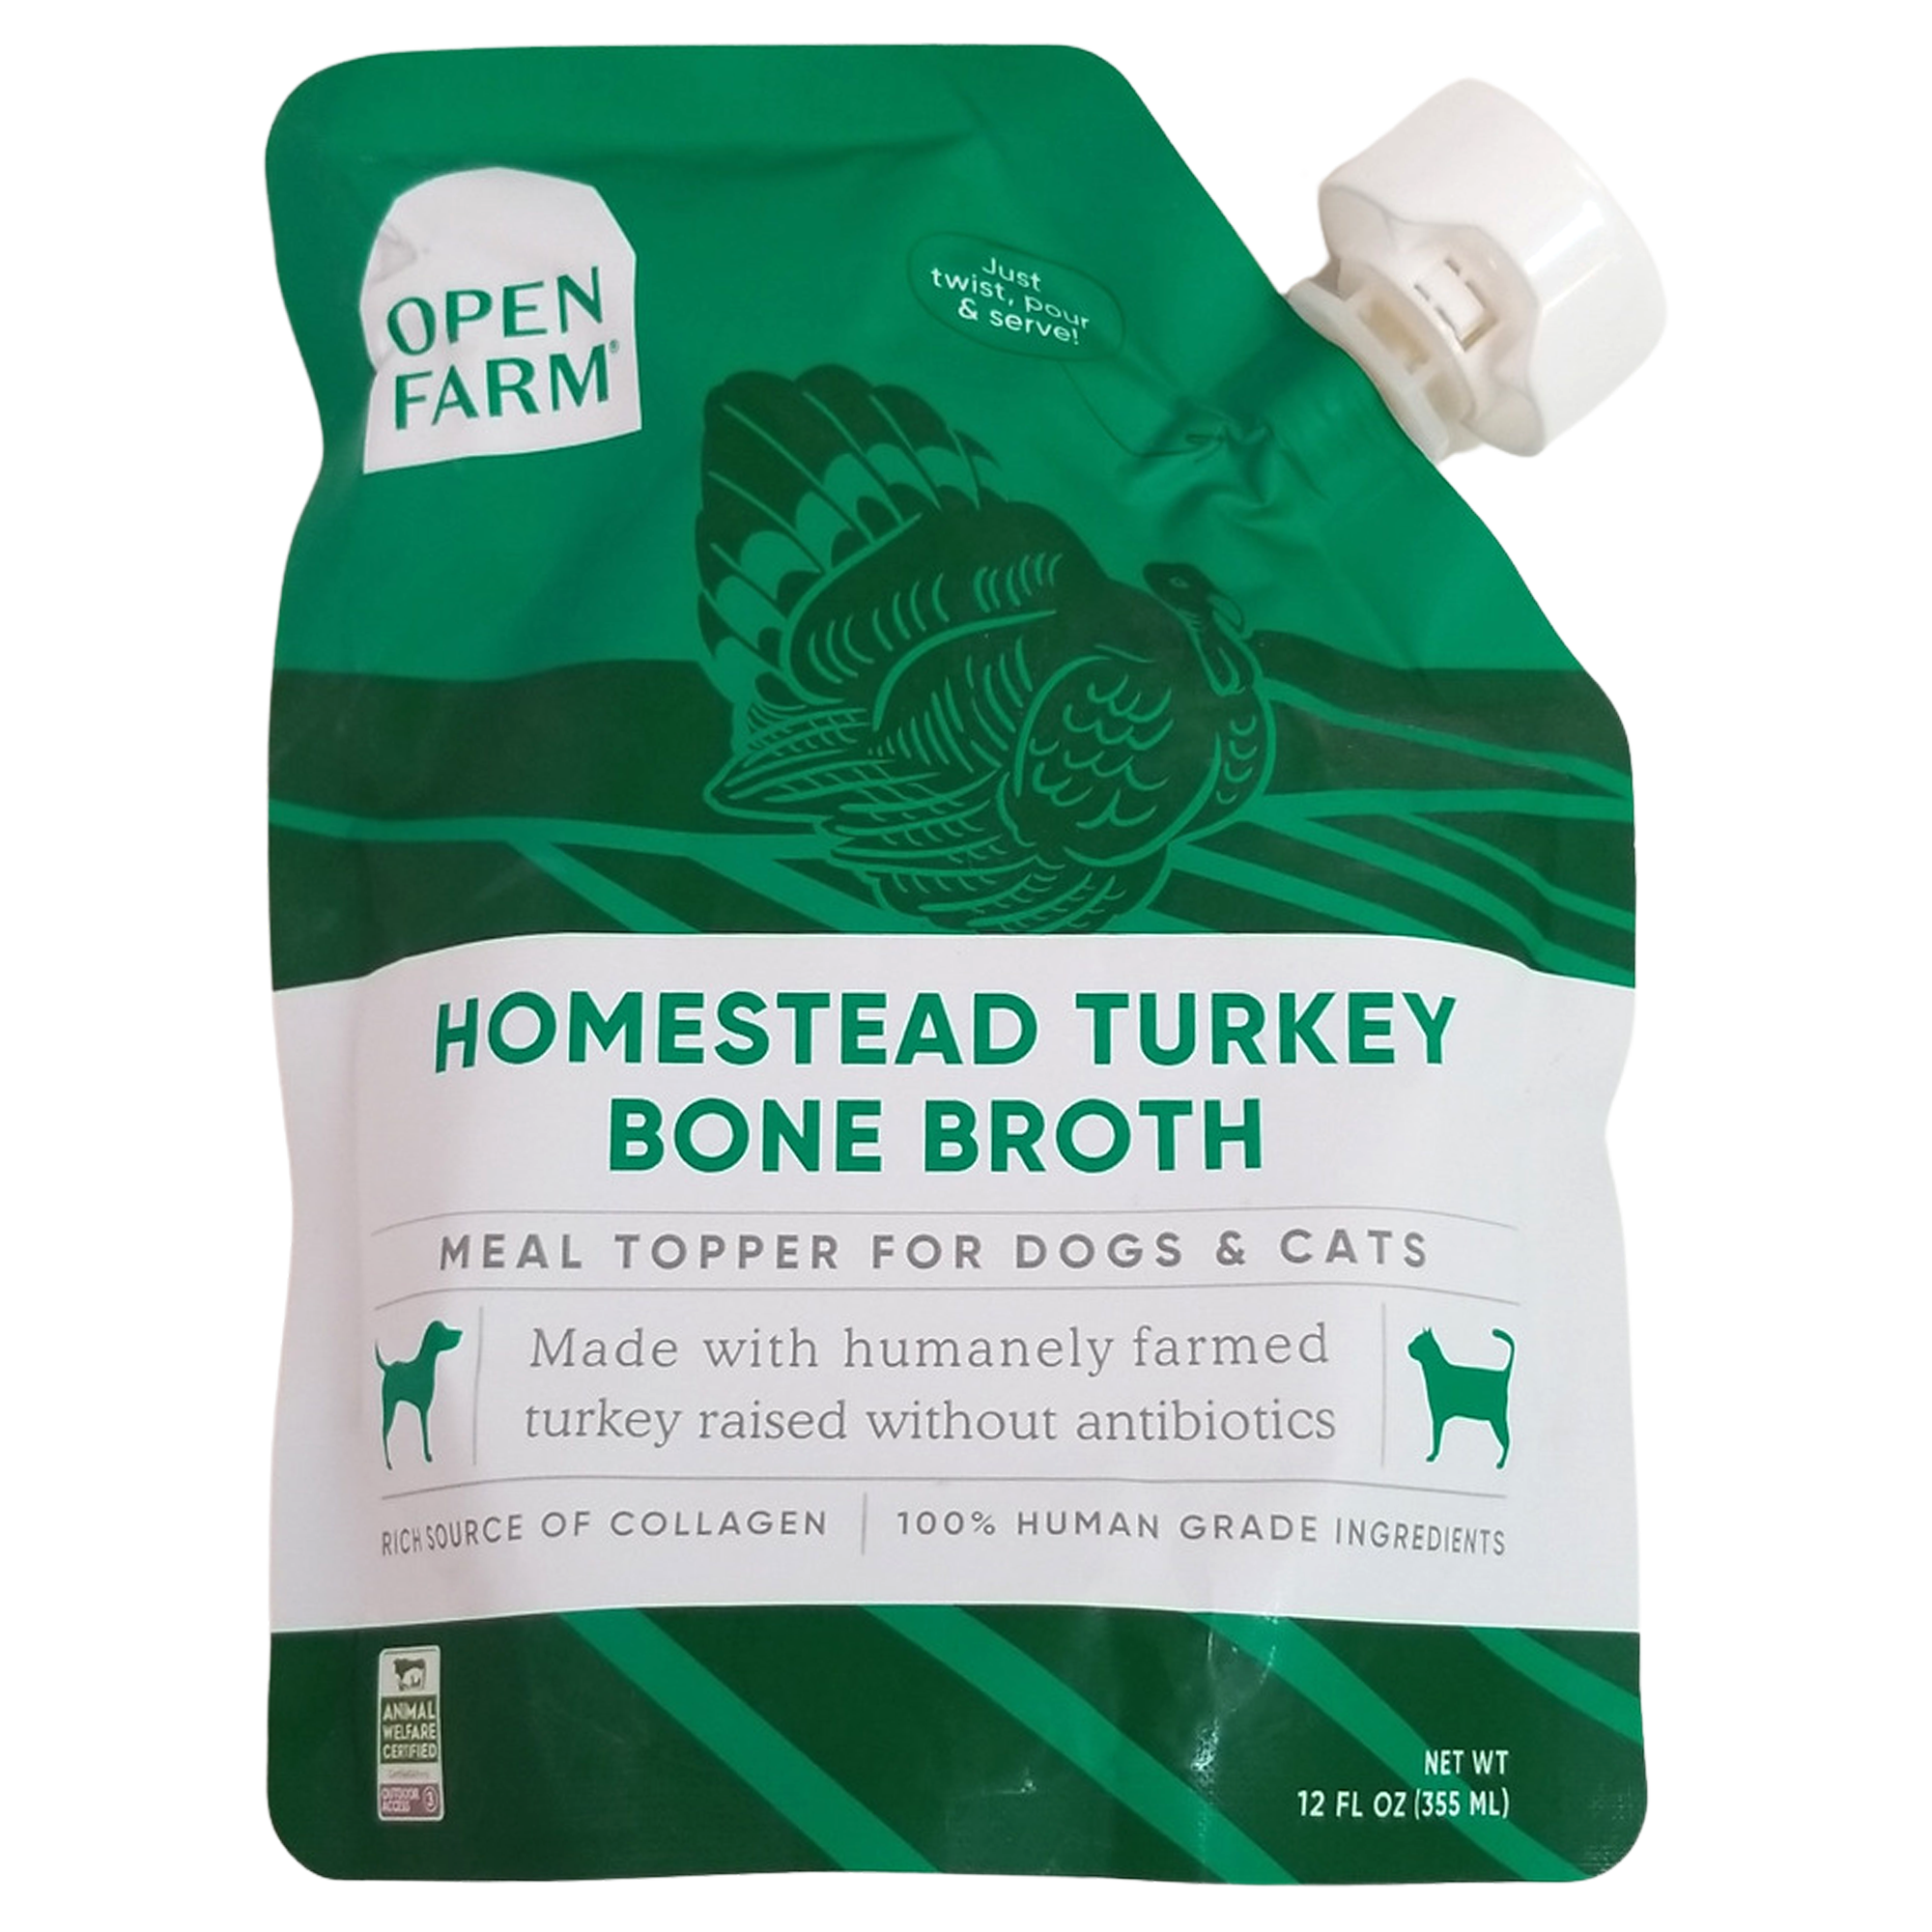 Open Farm Meal Topper for Dogs & Cats, Homestead Turkey Bone Broth, 355mL